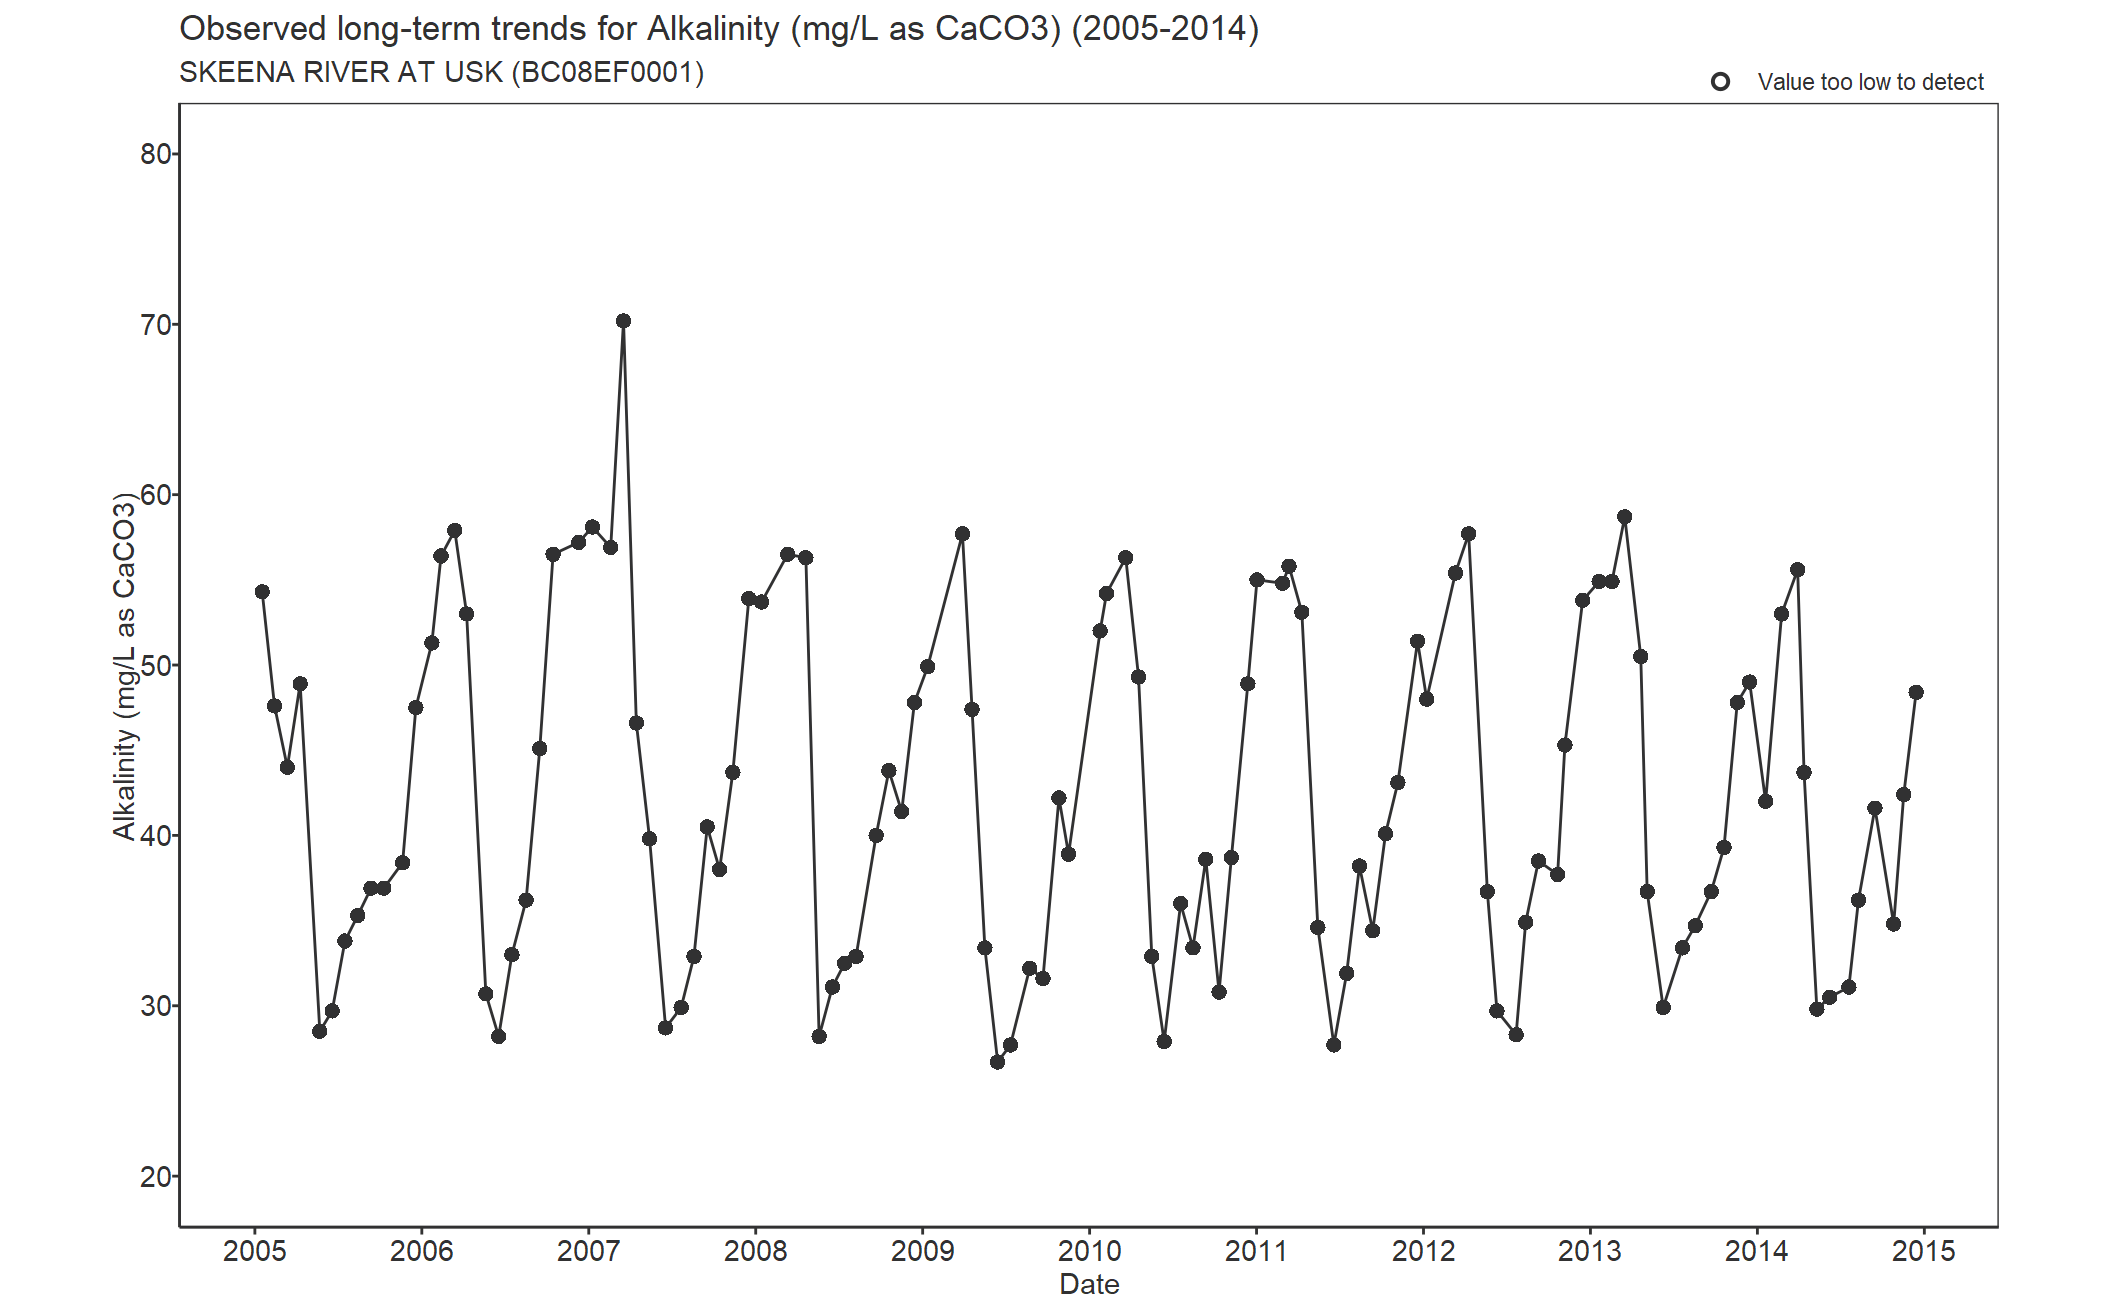 Observed long-term trends for Alkalinity (2005-2014)